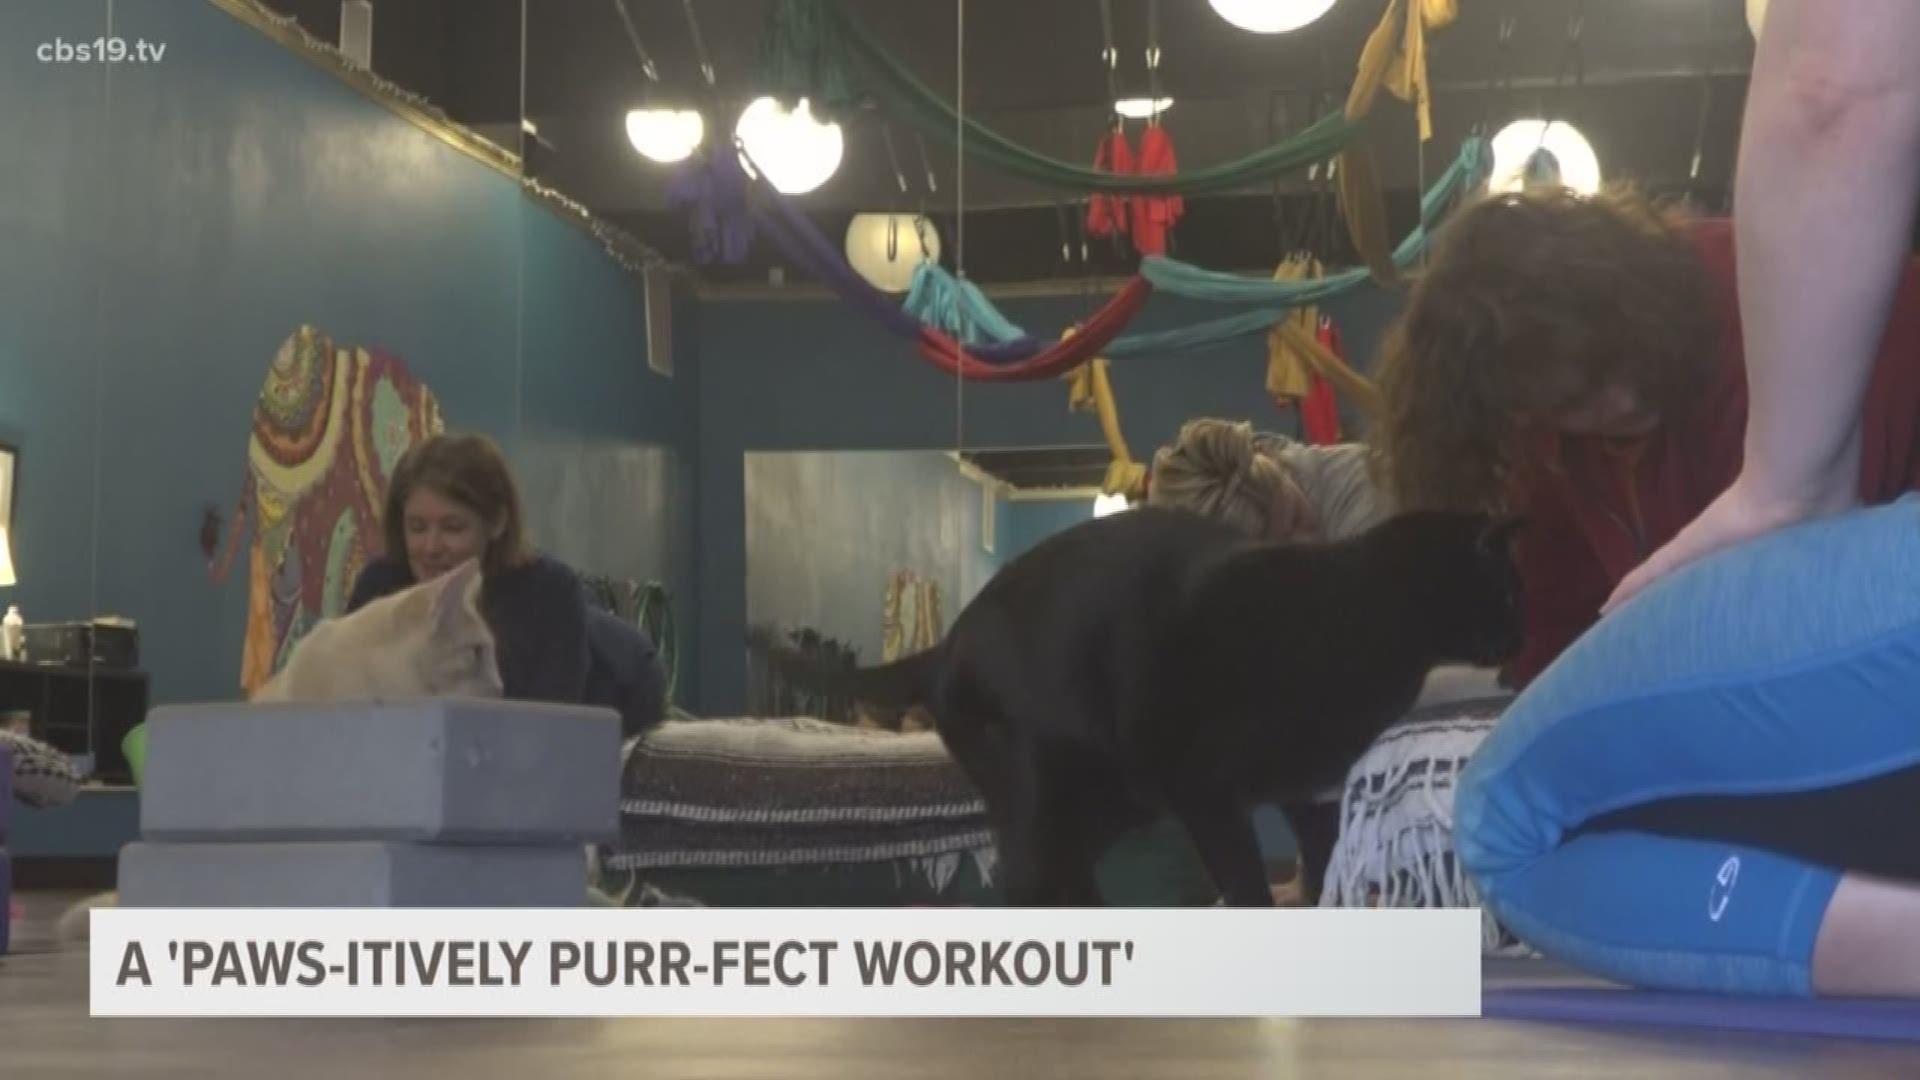 A workout studio in Flint, Texas, offers cat yoga while also working with a cat rescue organization to place cats in forever homes.